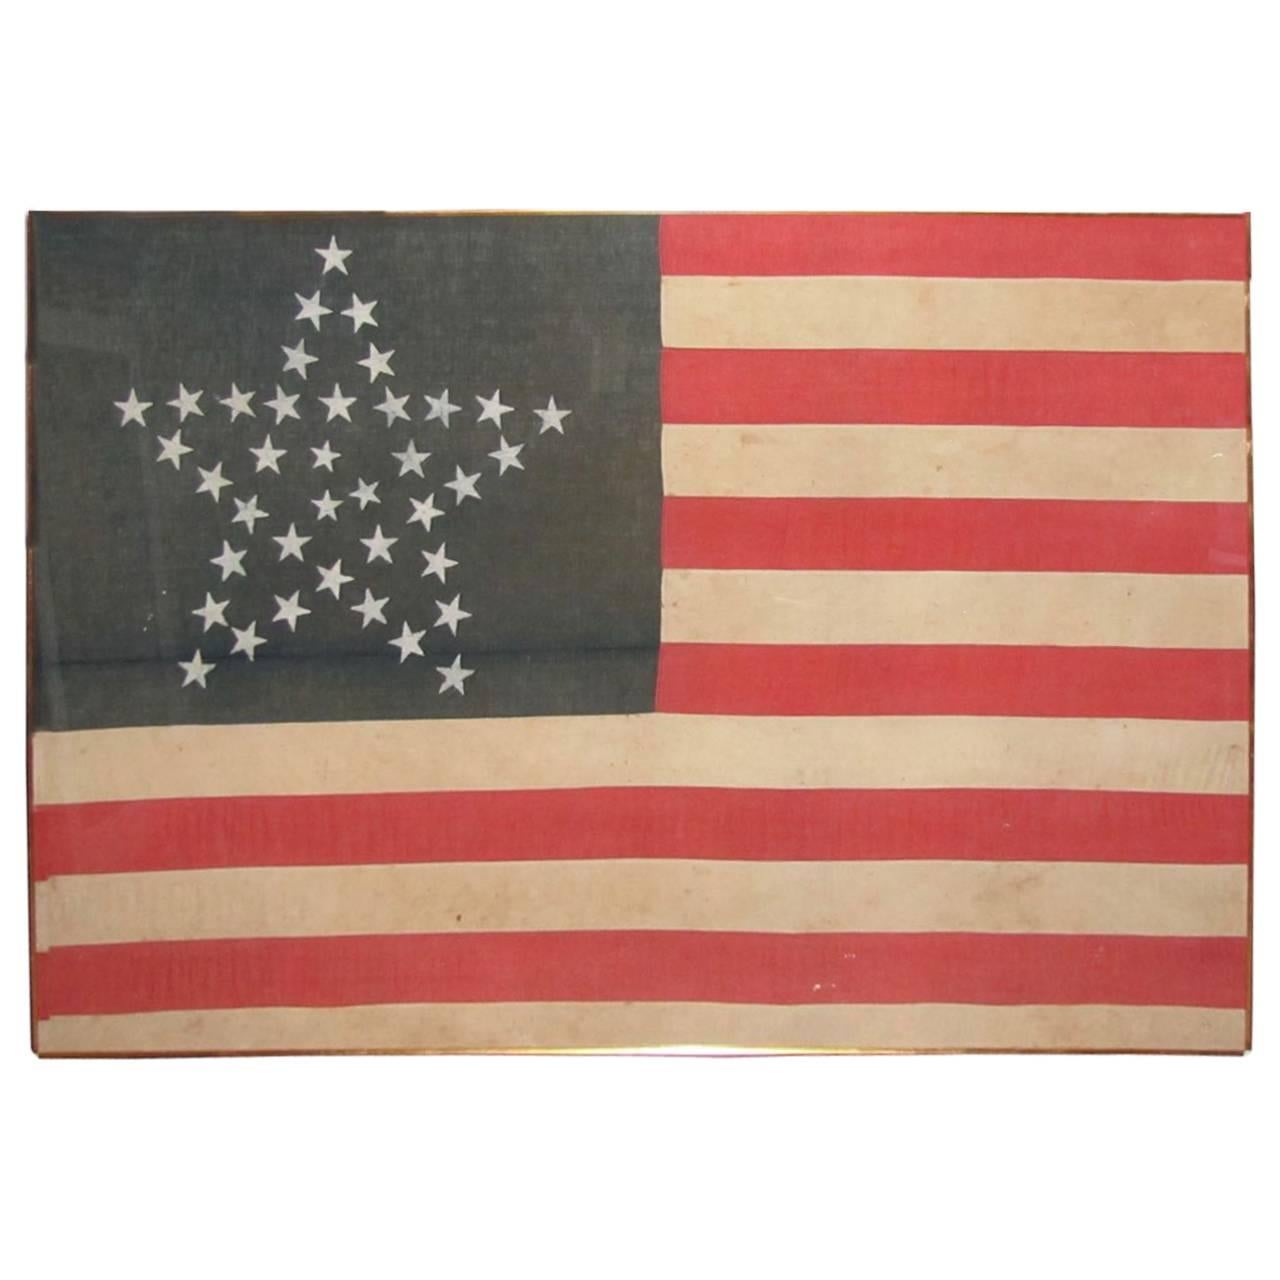 38 Star Flag with Great Star Arrangement Rare For Sale